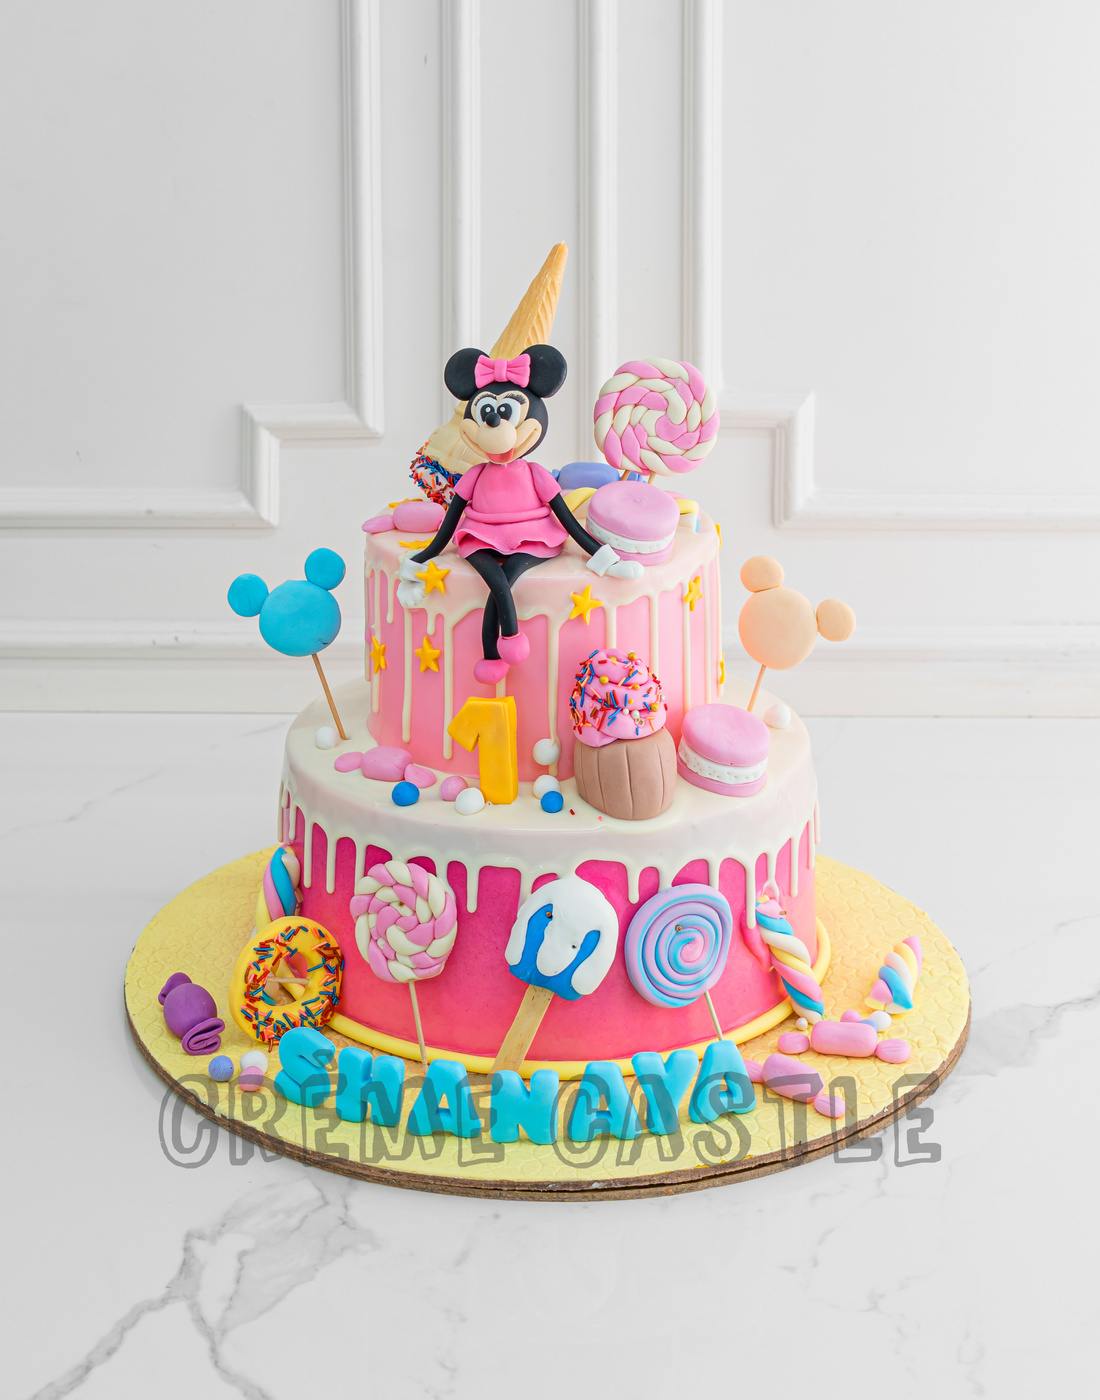 Minnie Mouse Themed Birthday Cake www.cakes2envy.com | Mini mouse birthday  cake, Minnie mouse birthday cakes, Minnie mouse cake design